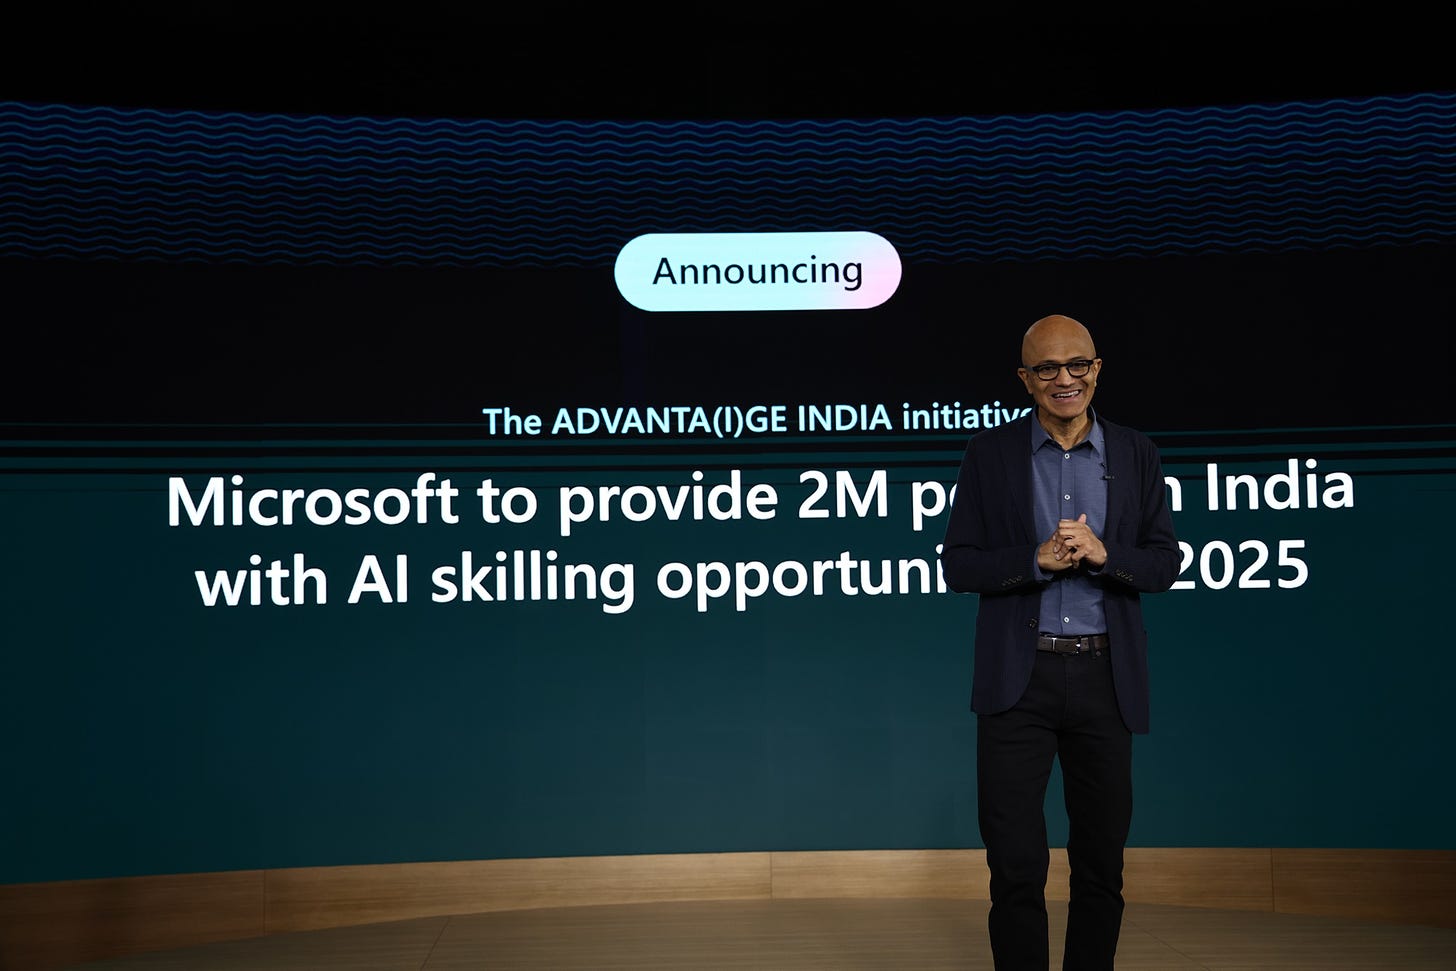 Microsoft chairman and CEO Satya Nadella giving a keynote address on stage